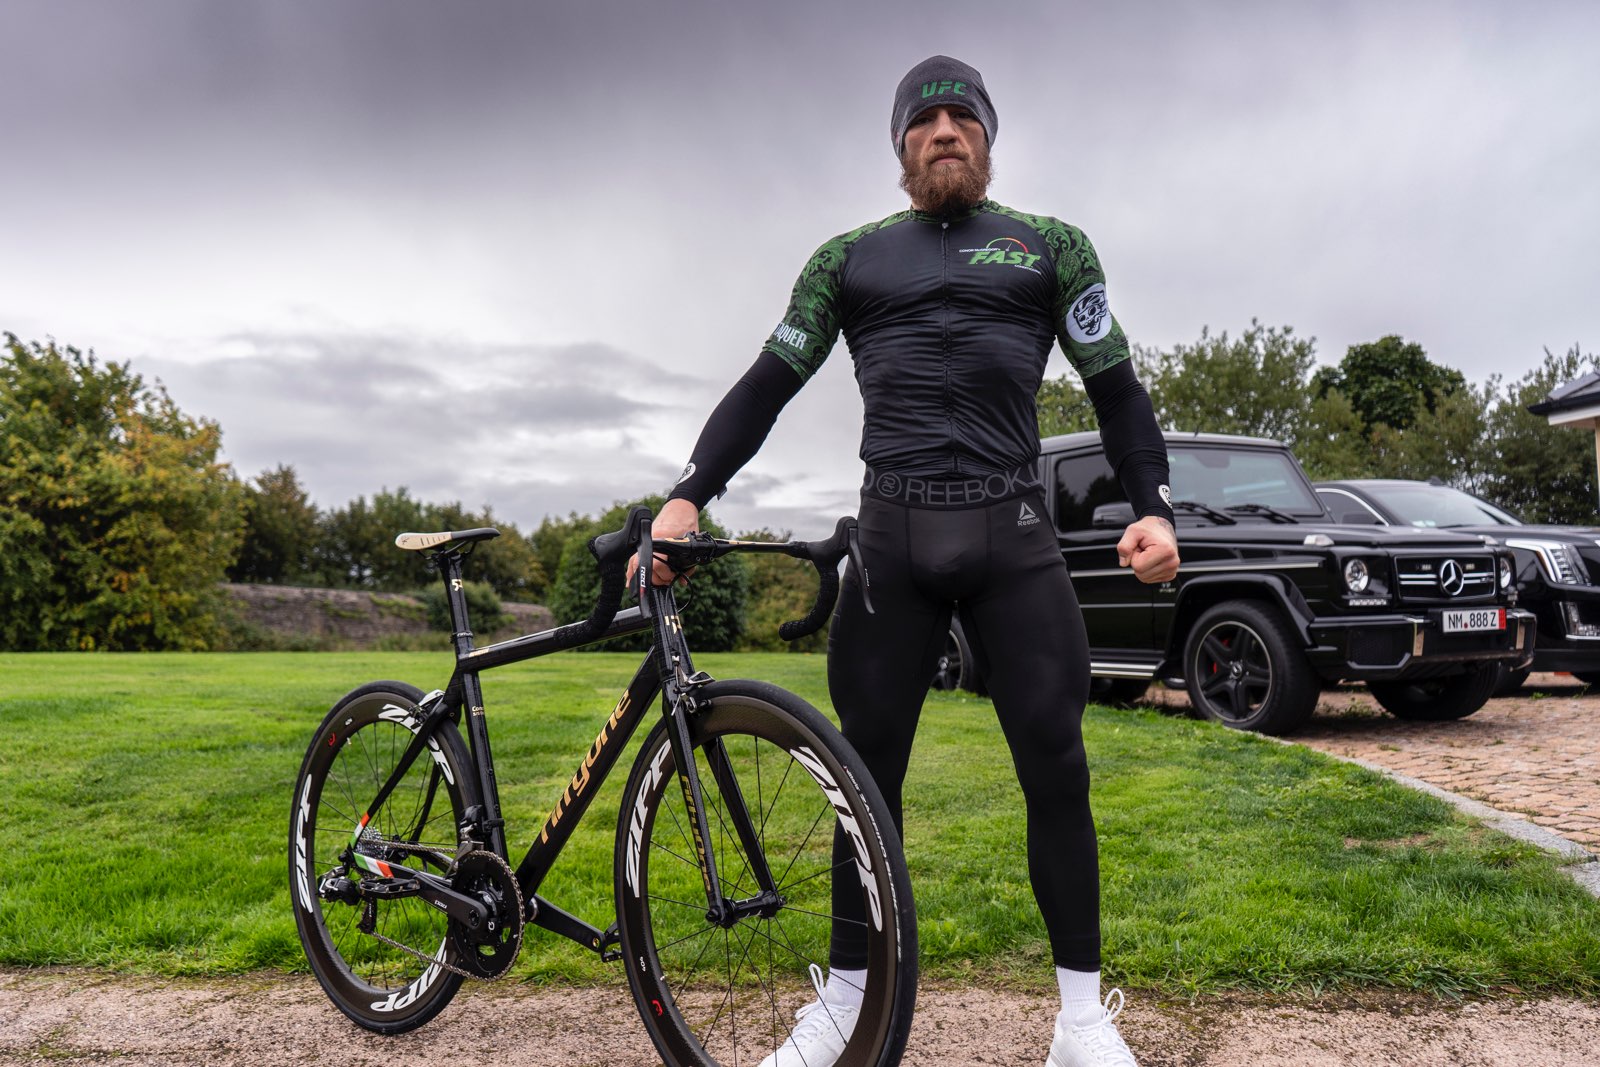 Connor McGregor rolls into his next fight on a custom ride from FiftyOne Bikes